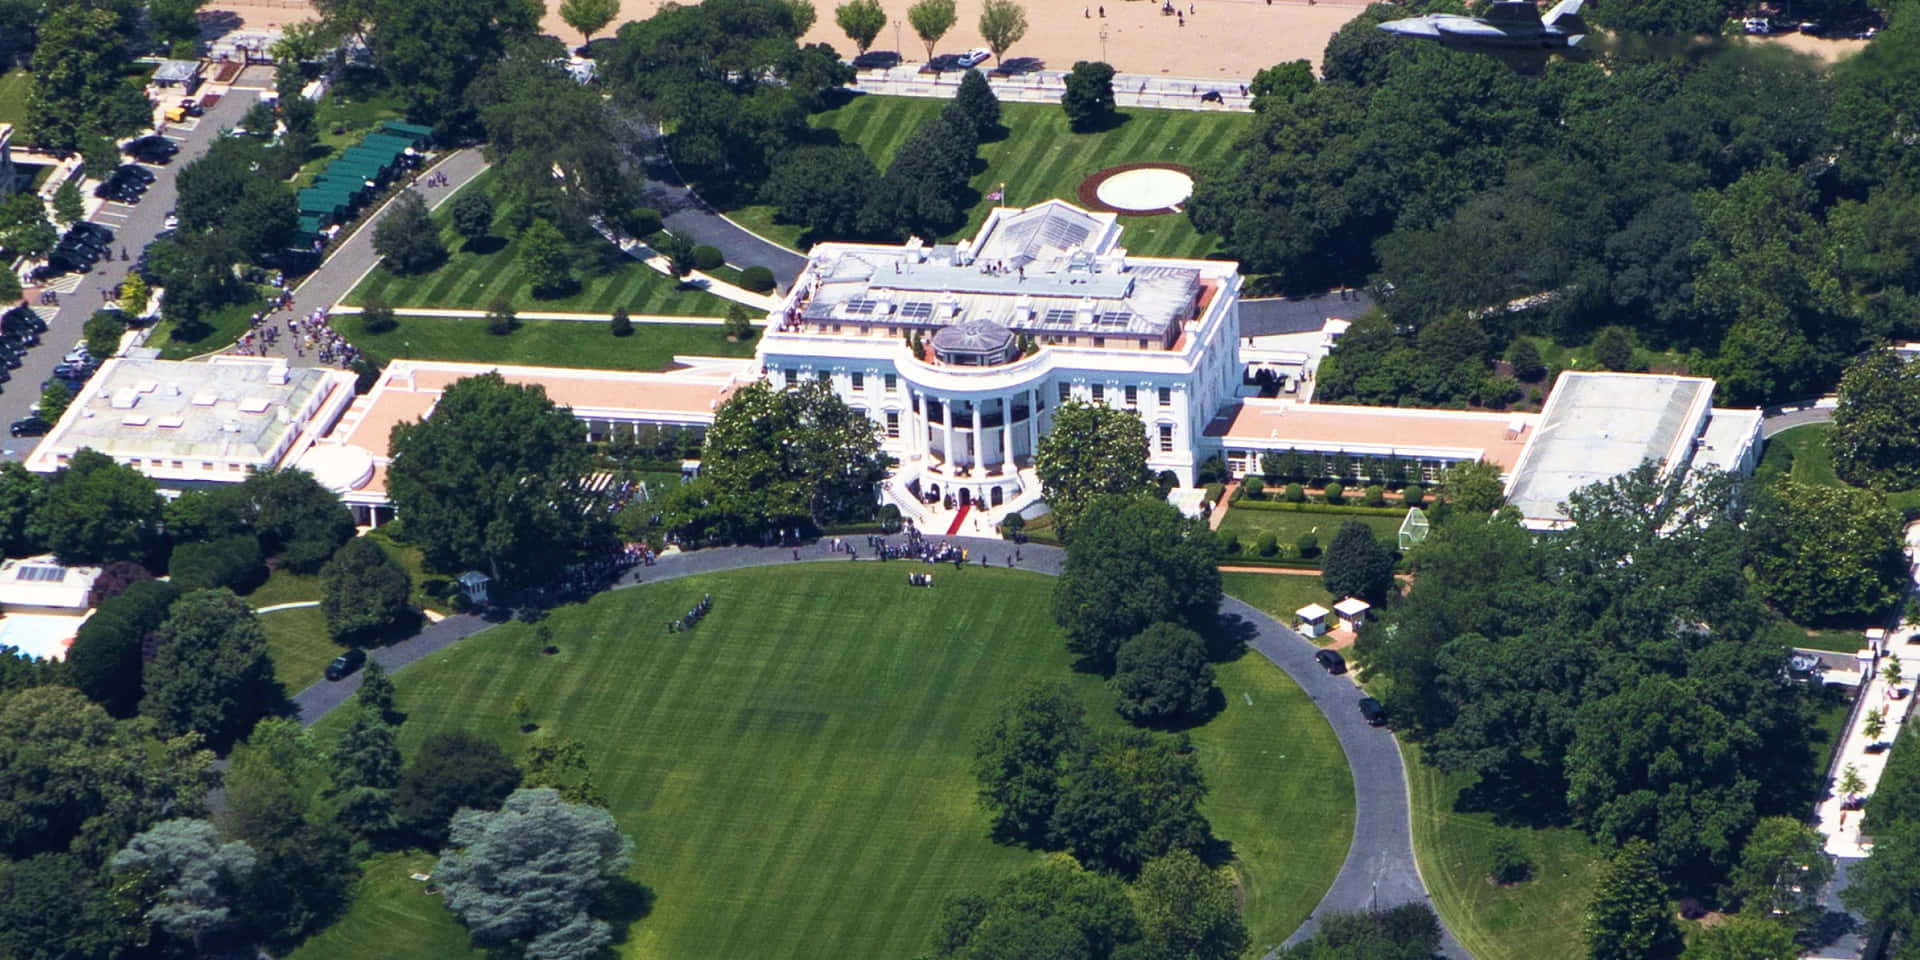 'The White House: Symbol of U.S. Government and Democracy'